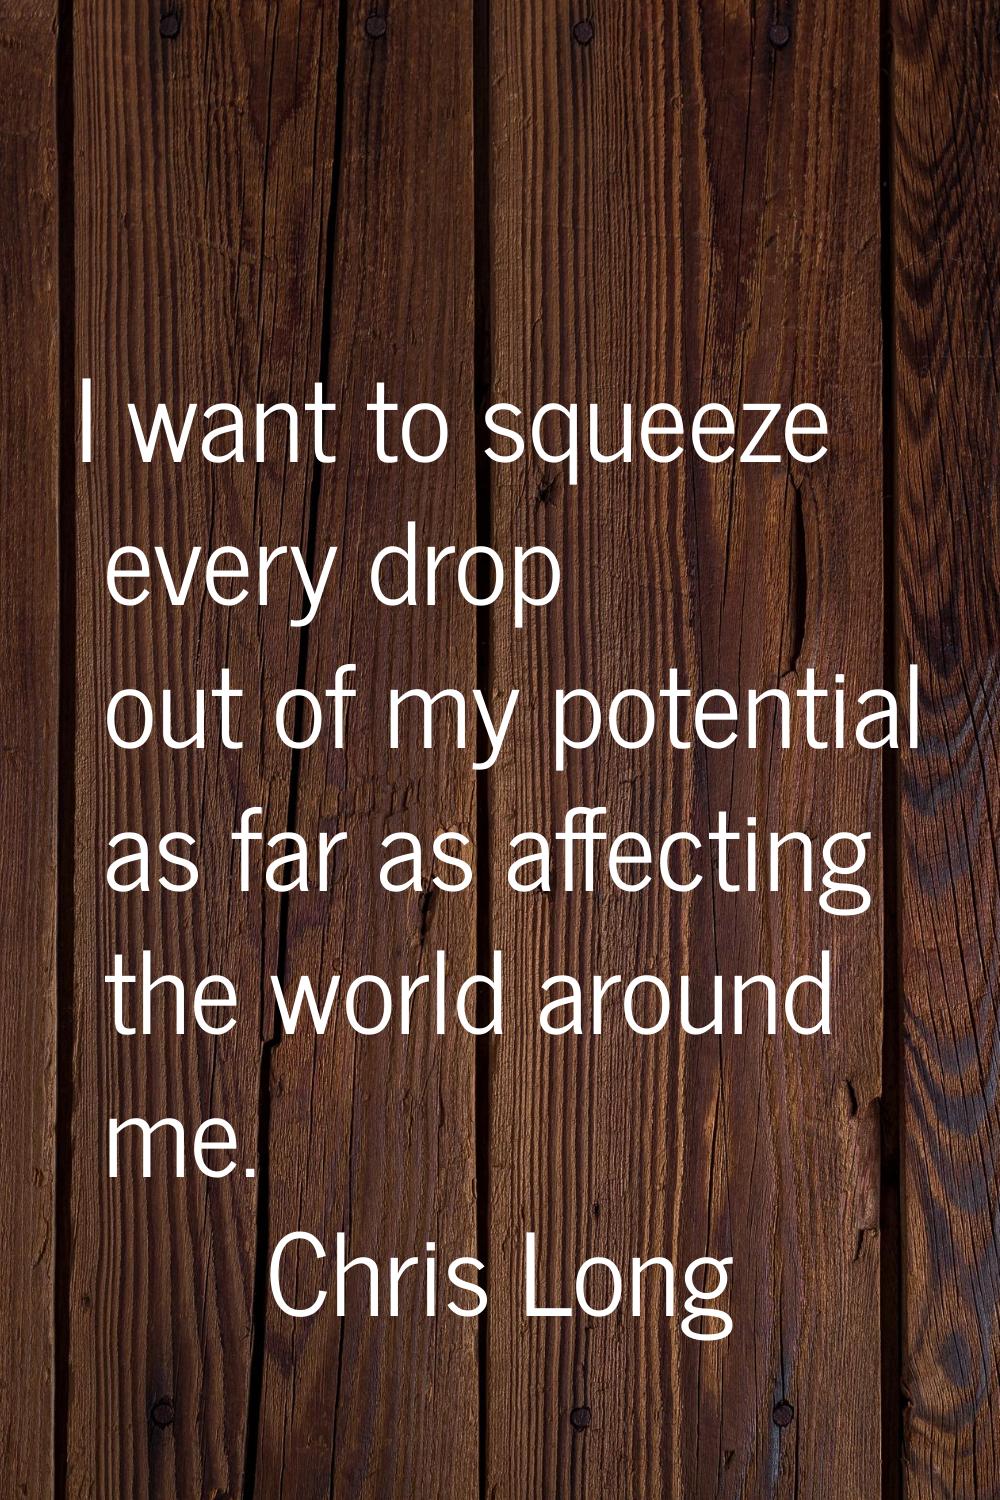 I want to squeeze every drop out of my potential as far as affecting the world around me.